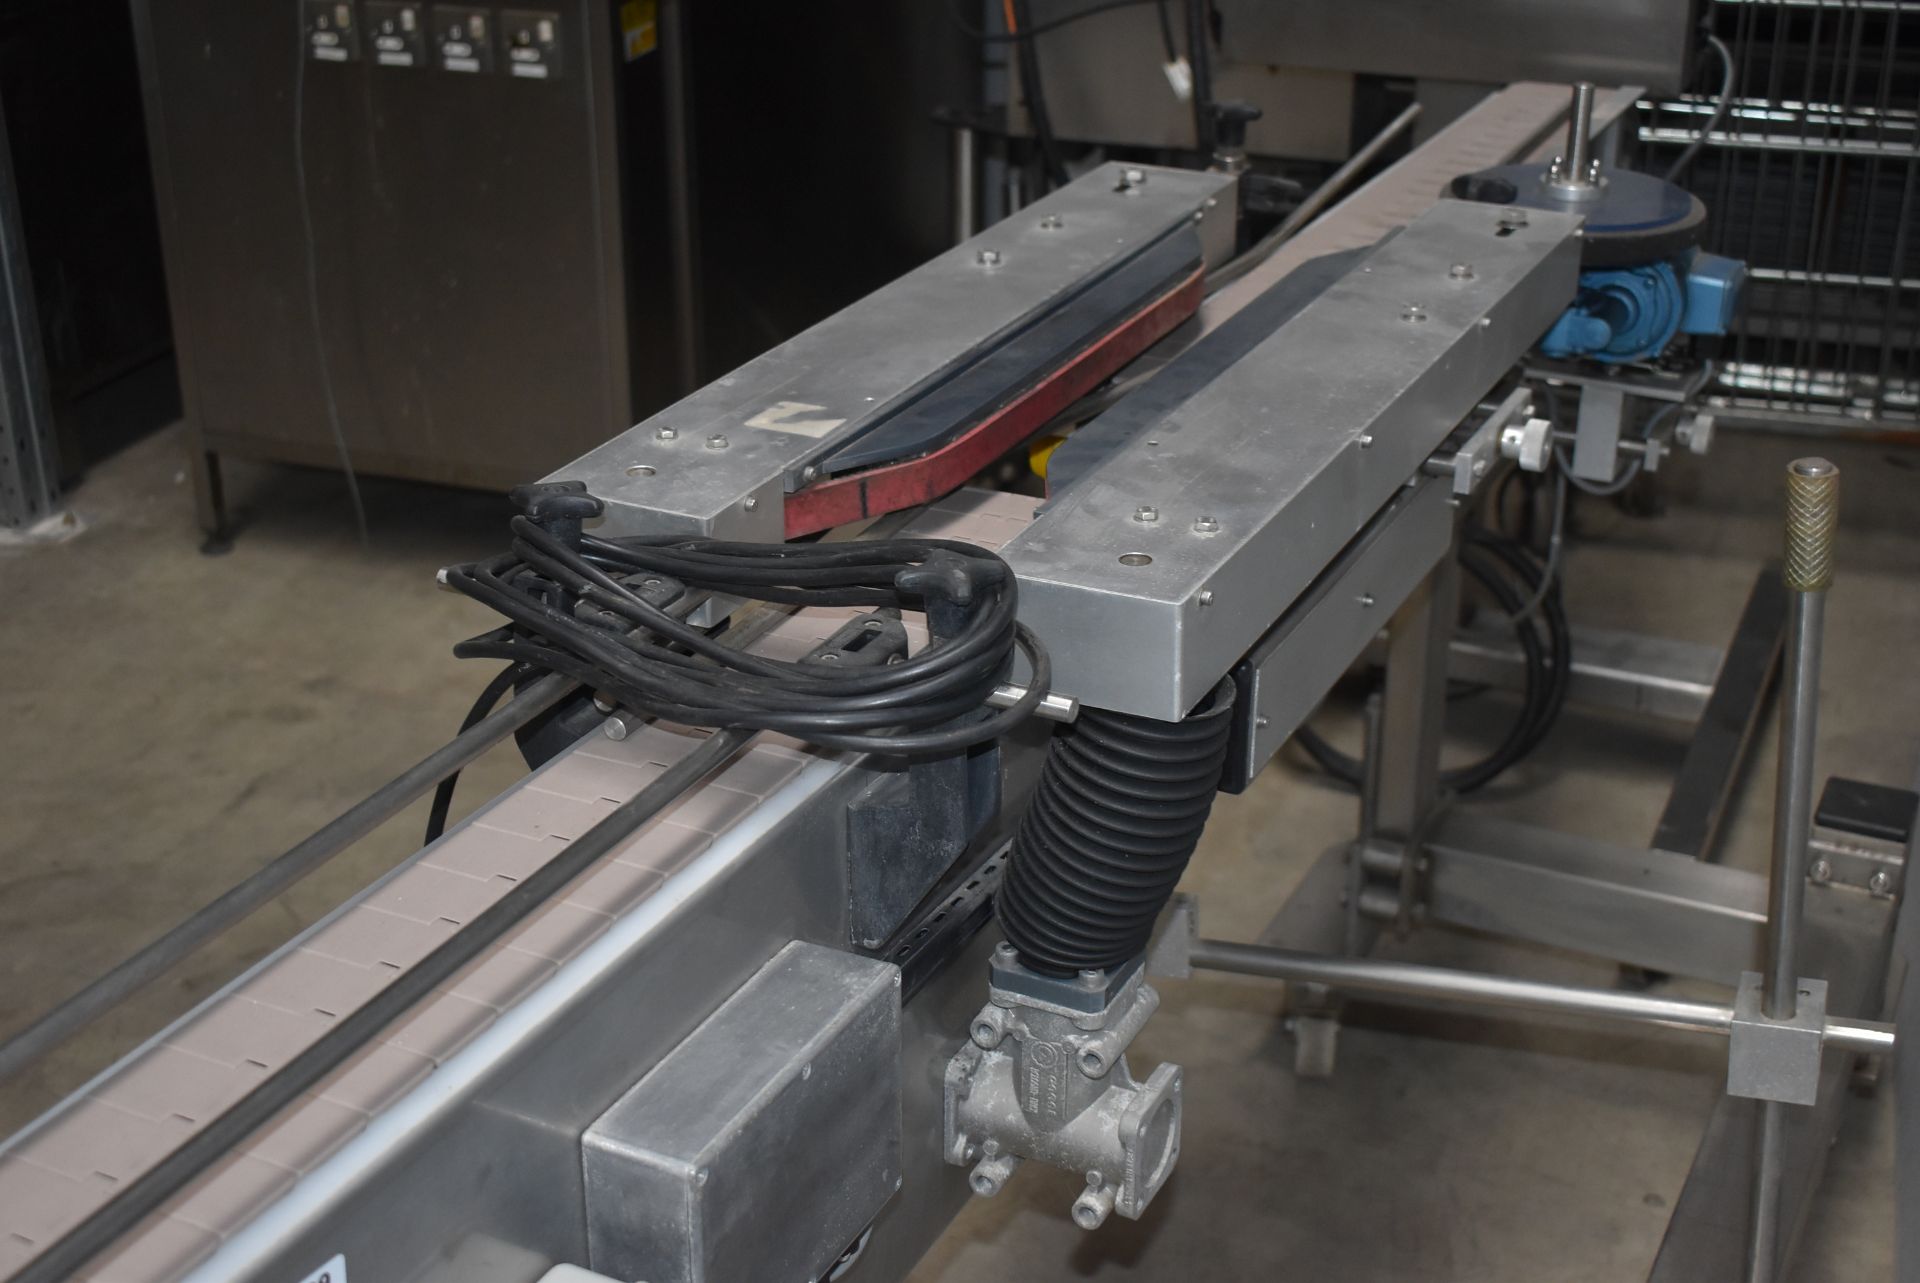 1 x Precision Labelling Systems Conveyor - Part Number 20745 - Approx Size: H100 x W250 cms - - Image 20 of 25